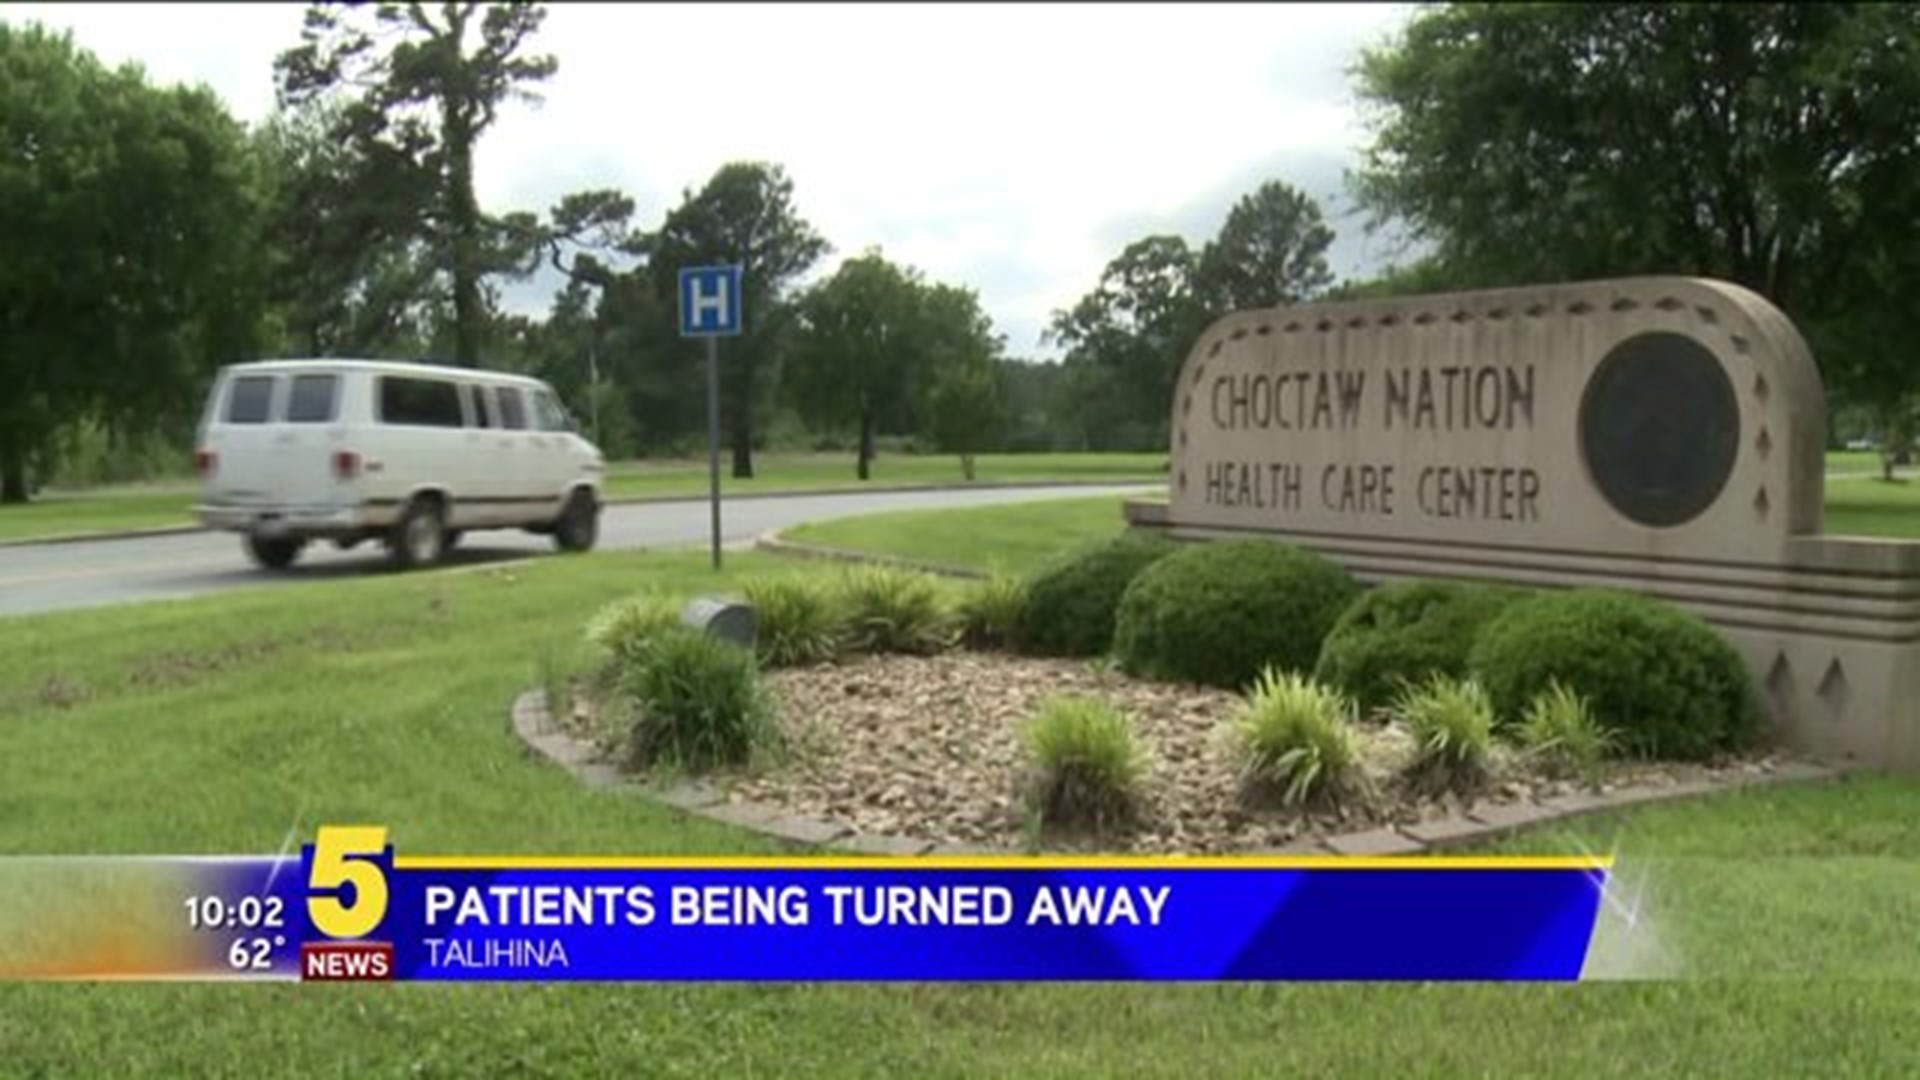 Flooding Closes Choctaw Nation Healthcare Center Outpatient Clinics